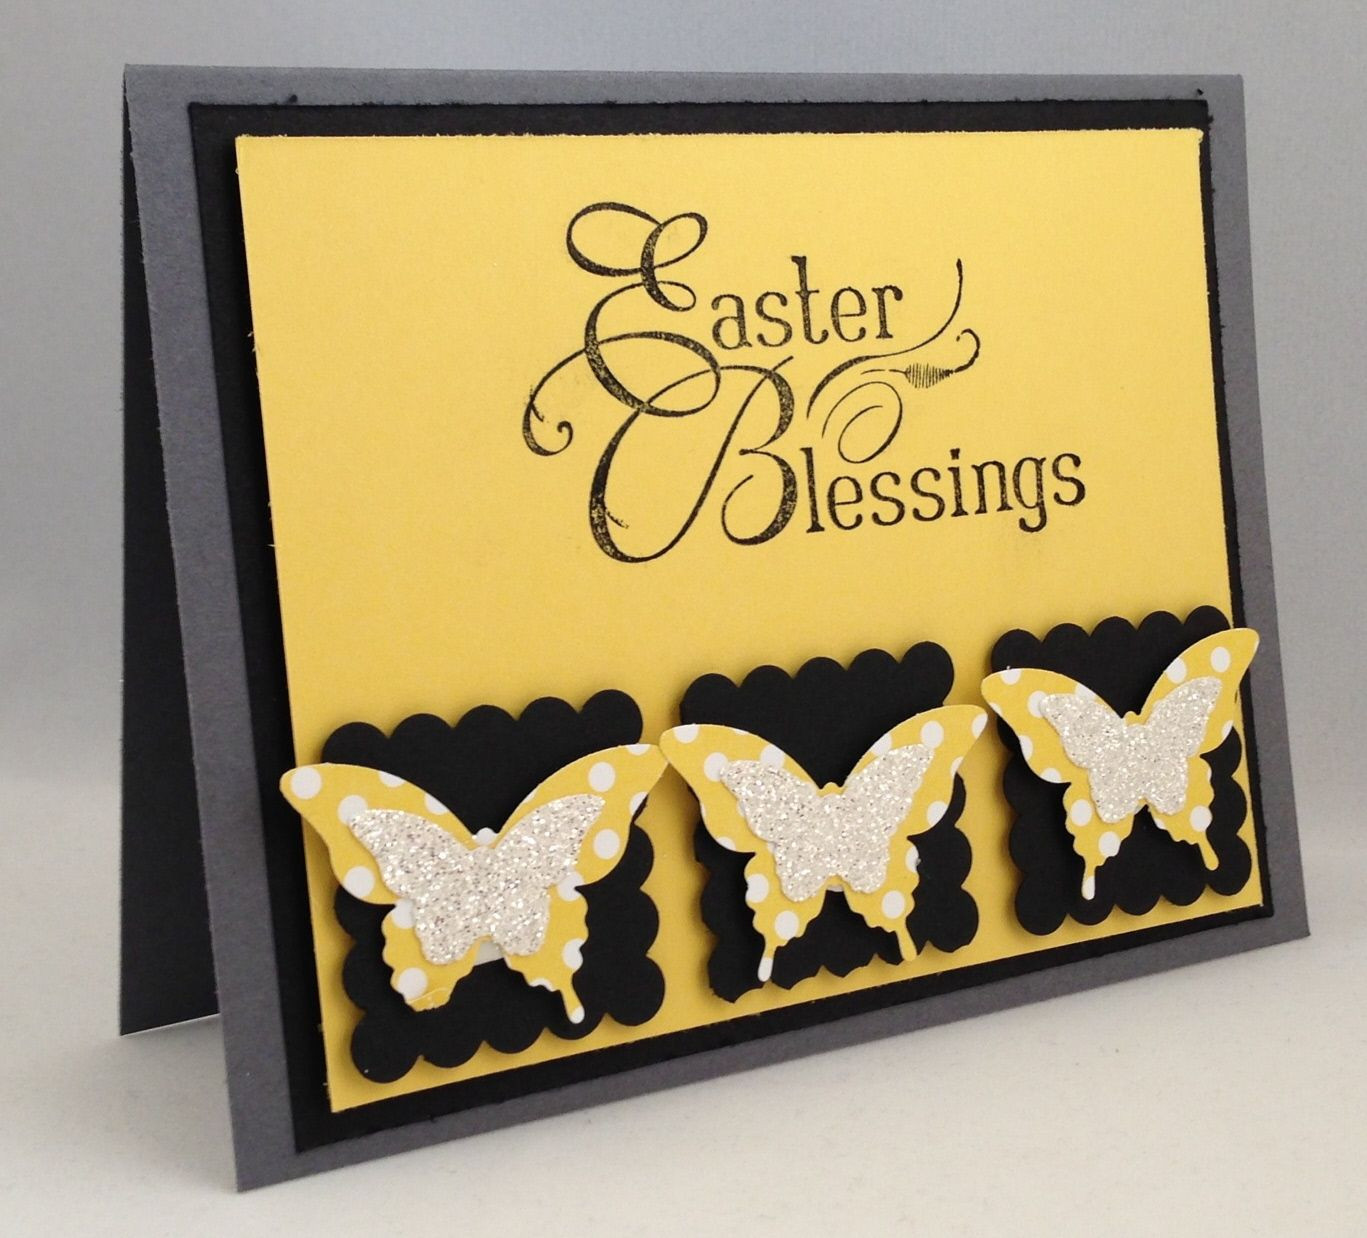 Stampin Up Easter Cards Ideas
 Stampin Up Easter and butterfly Card Ideas